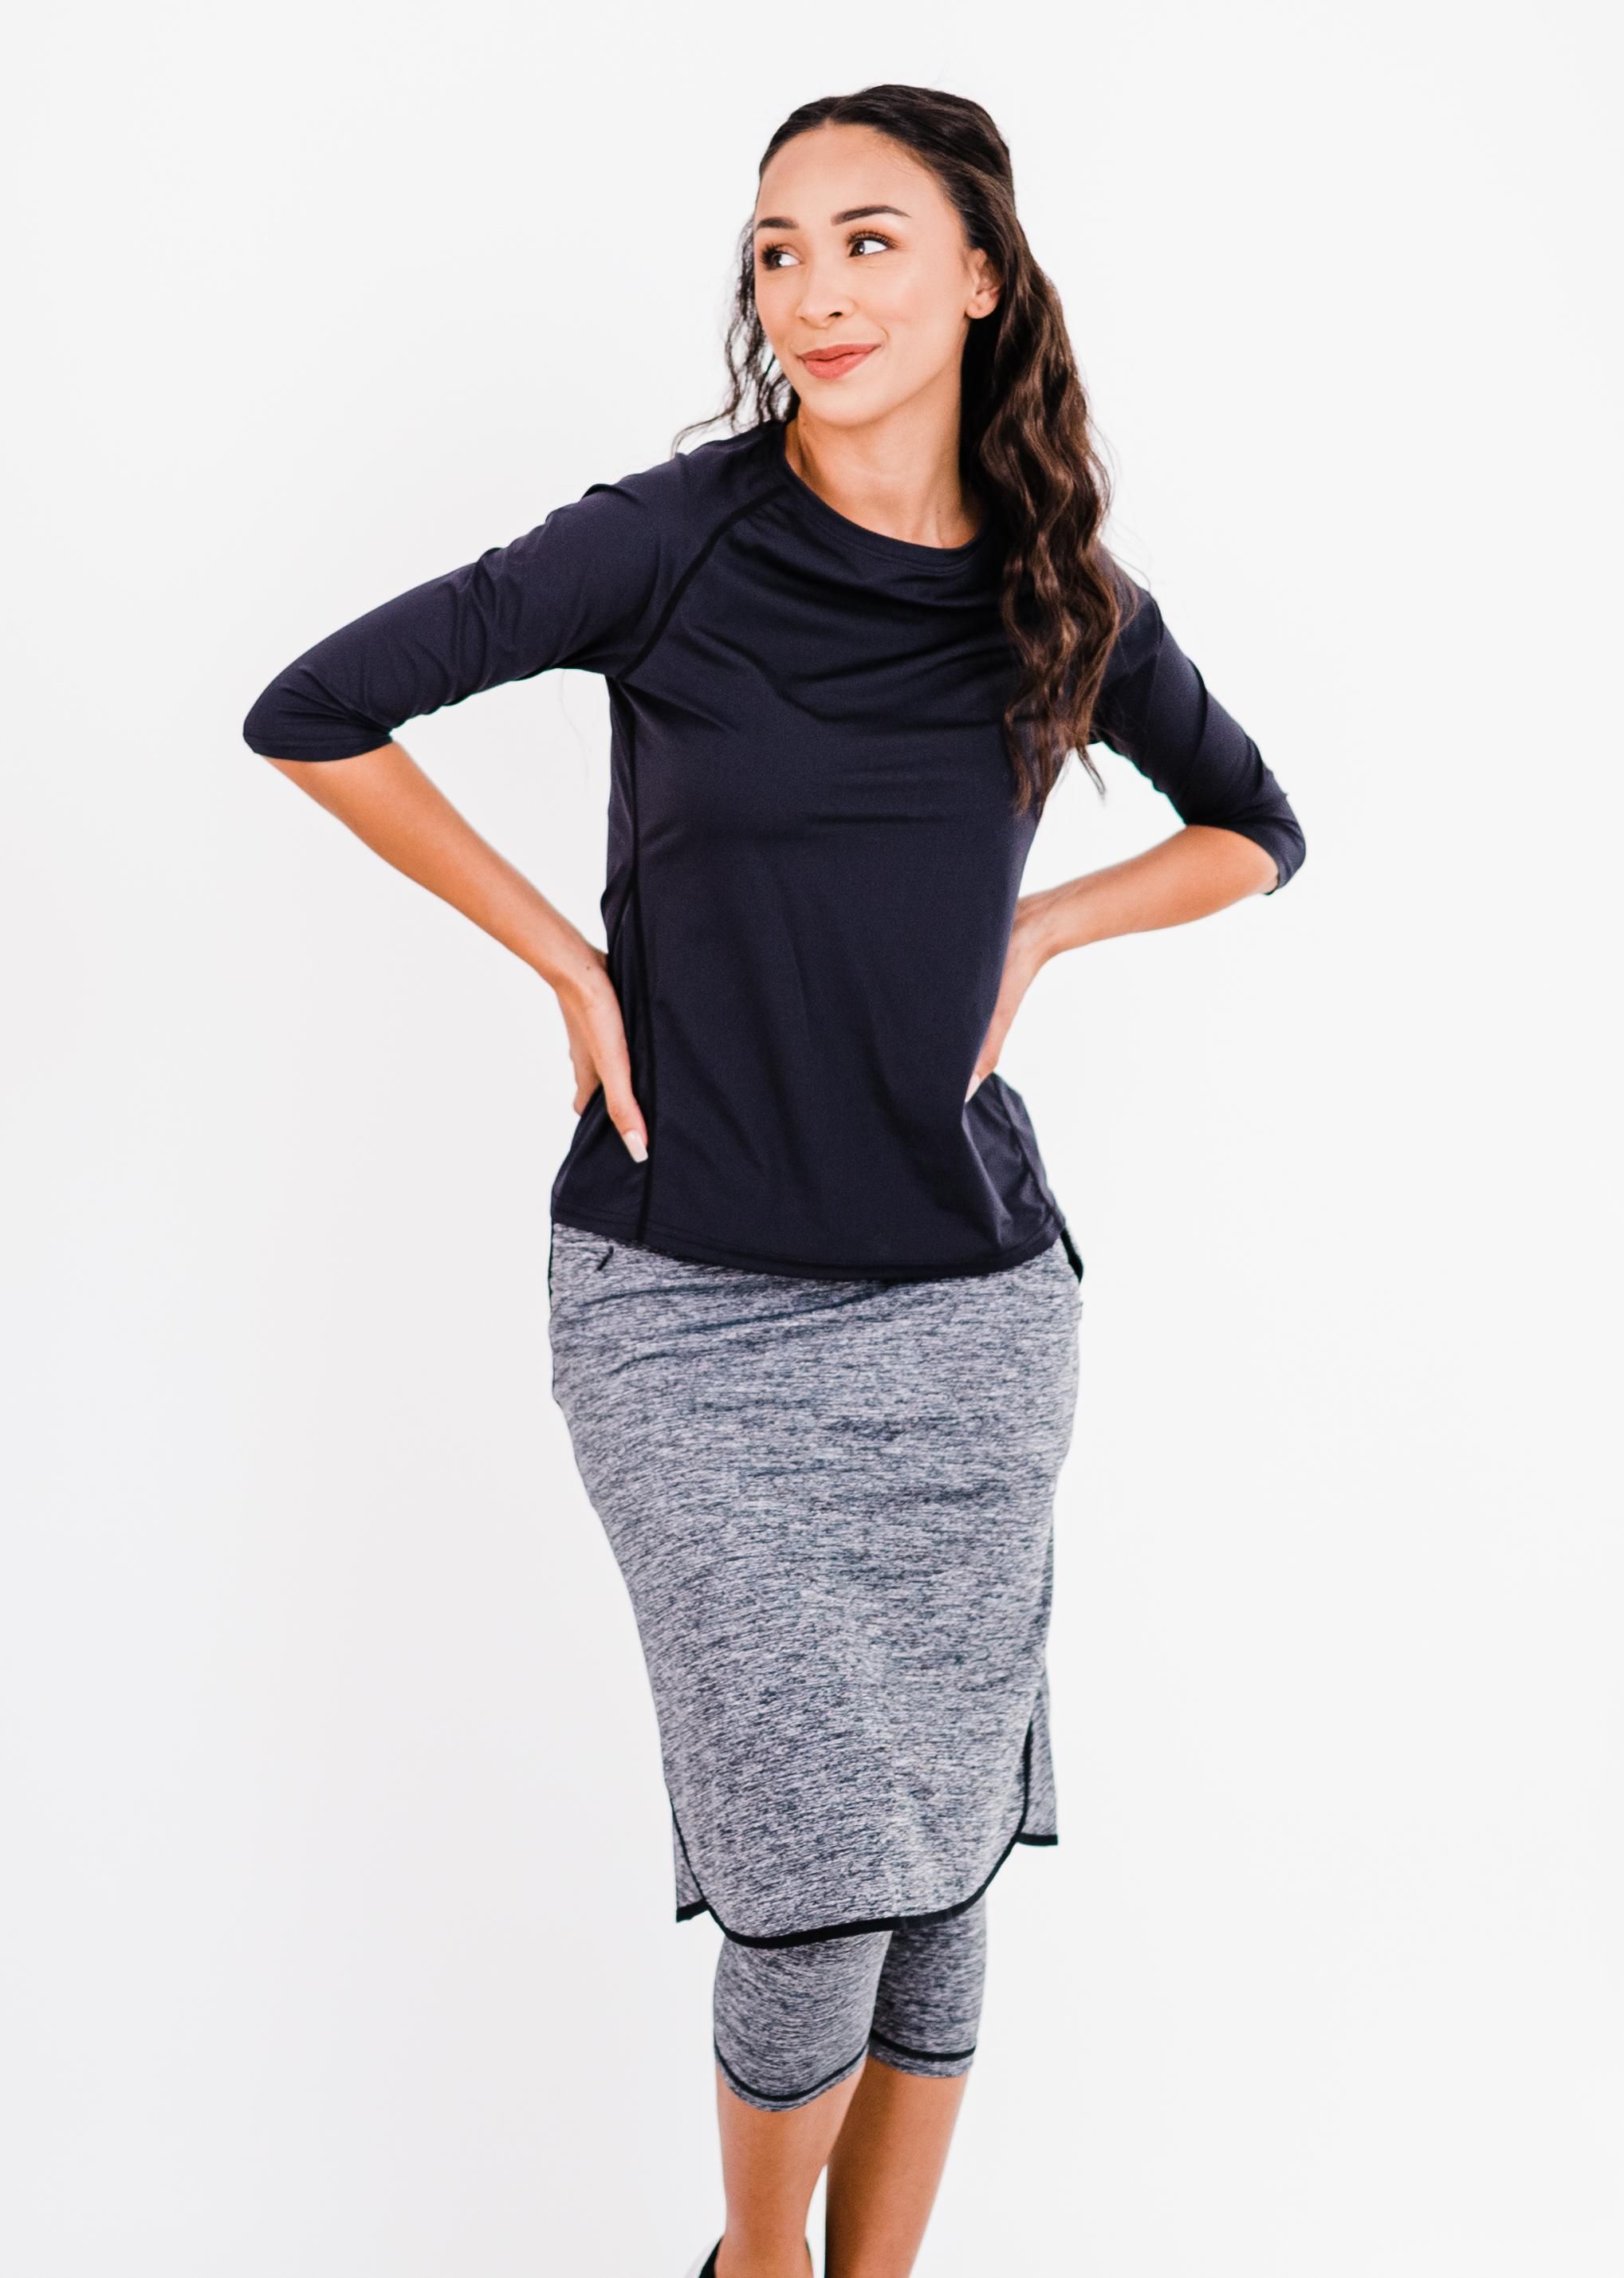 Pro 3/4 Sleeve Performance Top With Knee Length Lycra® Sport Skirt With Attached 17" Leggings